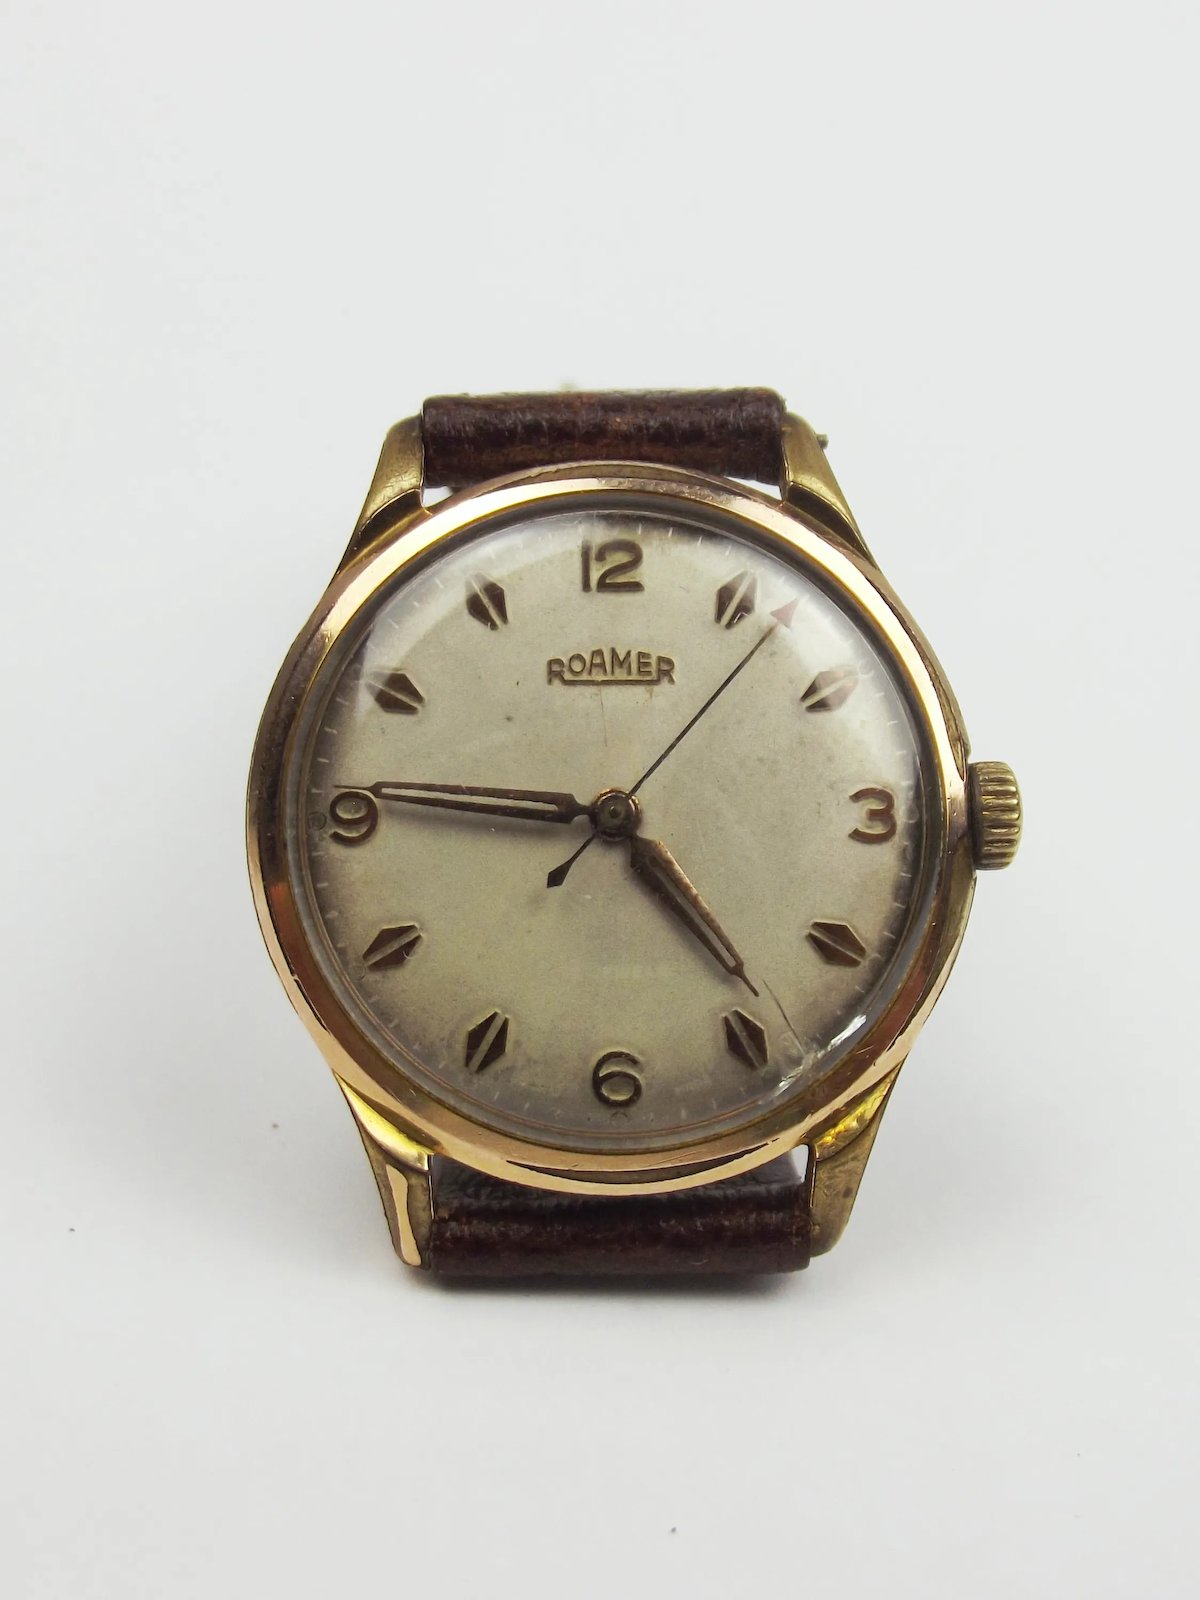 Gents Gold Plated Roamer MST 372 Manual Wrist Watch c1950s - Sally Antiques